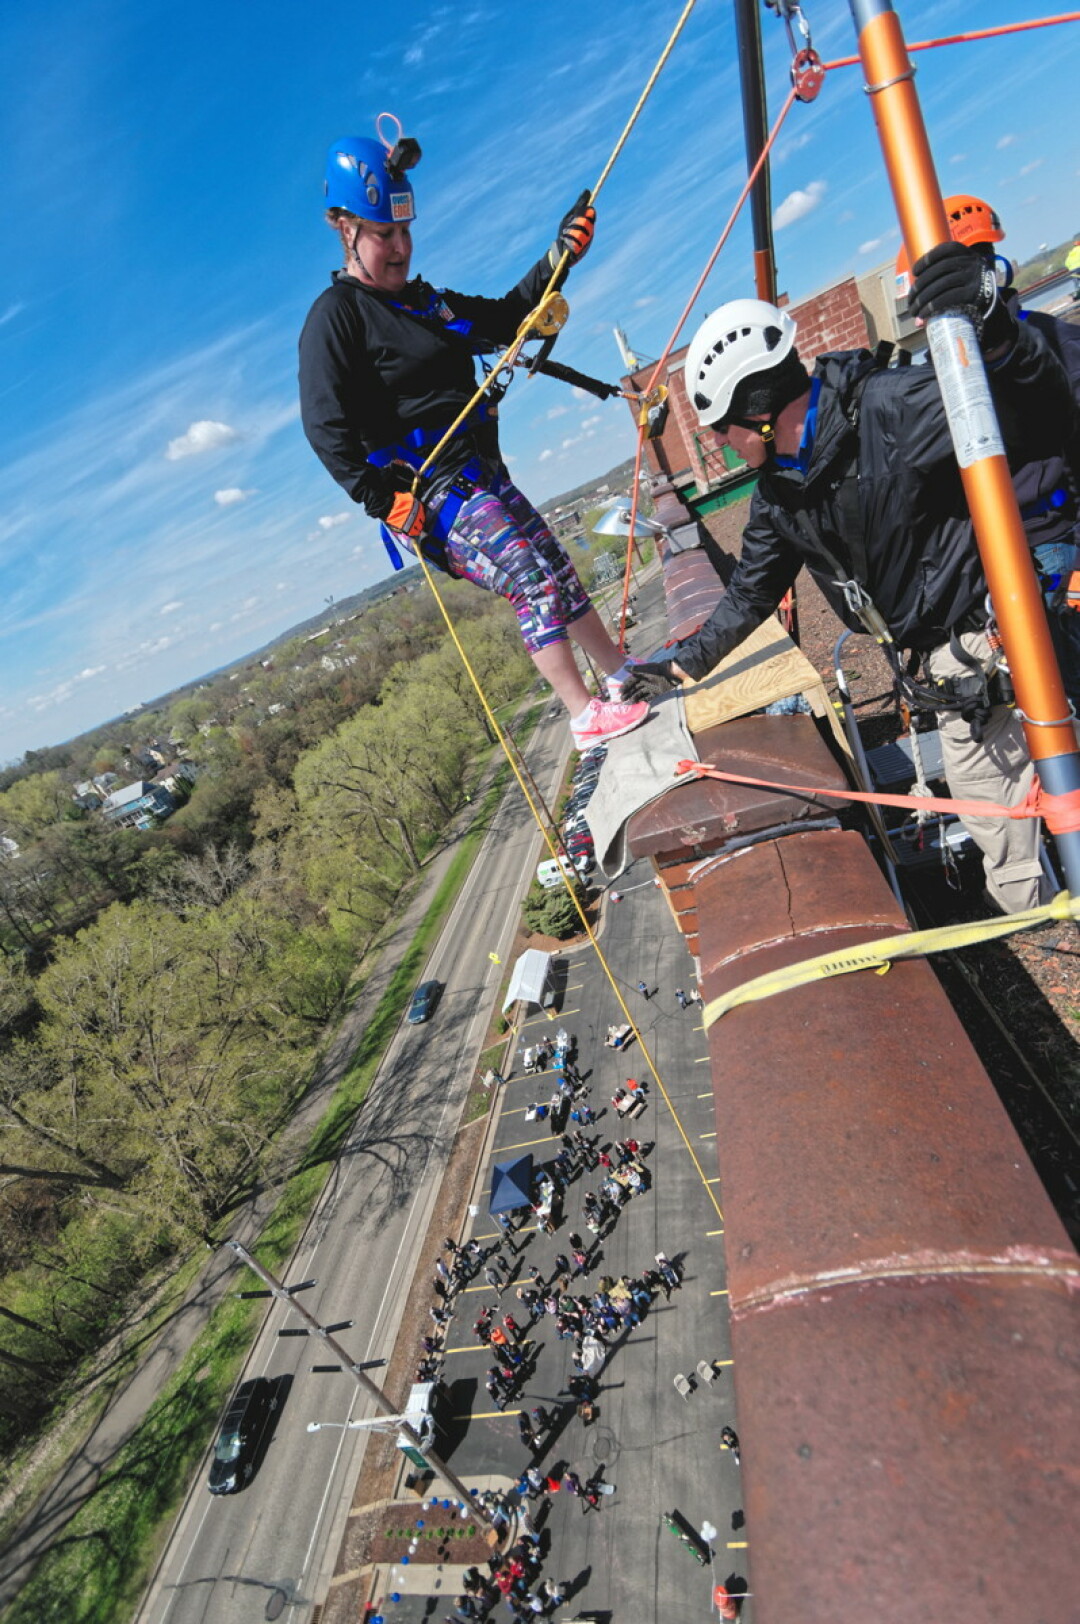 ONE OF THE EDGIEST PHOTOS VOLUME ONE HAS EVER PUBLISHED. On Saturday, May 11, locals rappelled down the side of Banbury Place on Galloway Street near downtown Eau Claire to help raise money for the Children’s Dyslexia Center. See more photos at VolumeOne.org